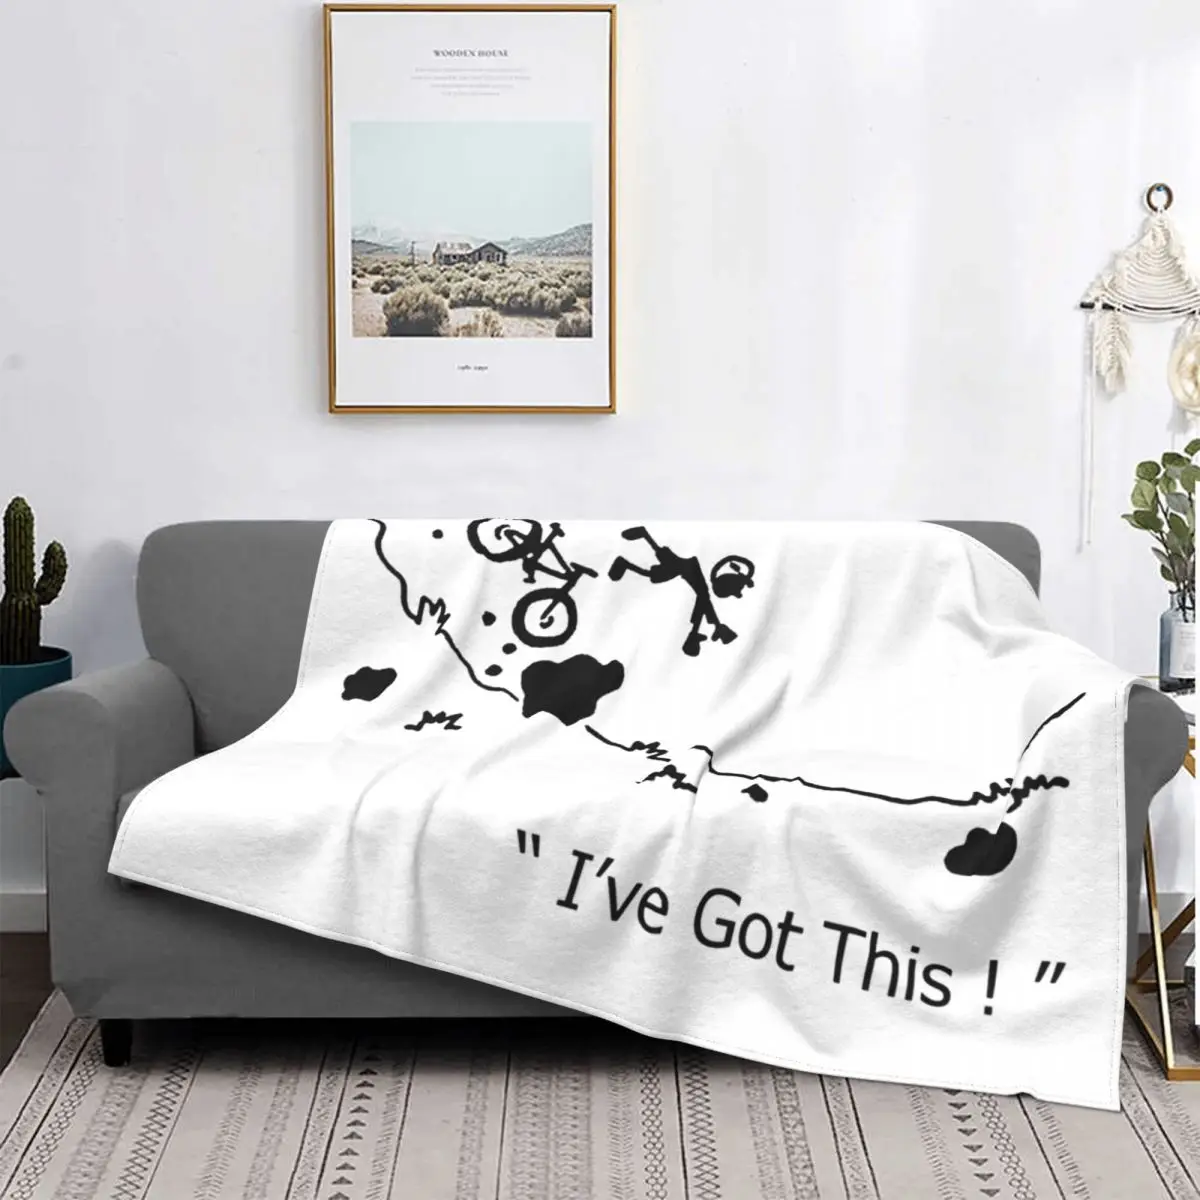 

Home Decorative Cycling Crash Mountain Bike Throw Blankets Merch Suprise Gifts I've Got This Cartoon Flannel Blankets and Throws